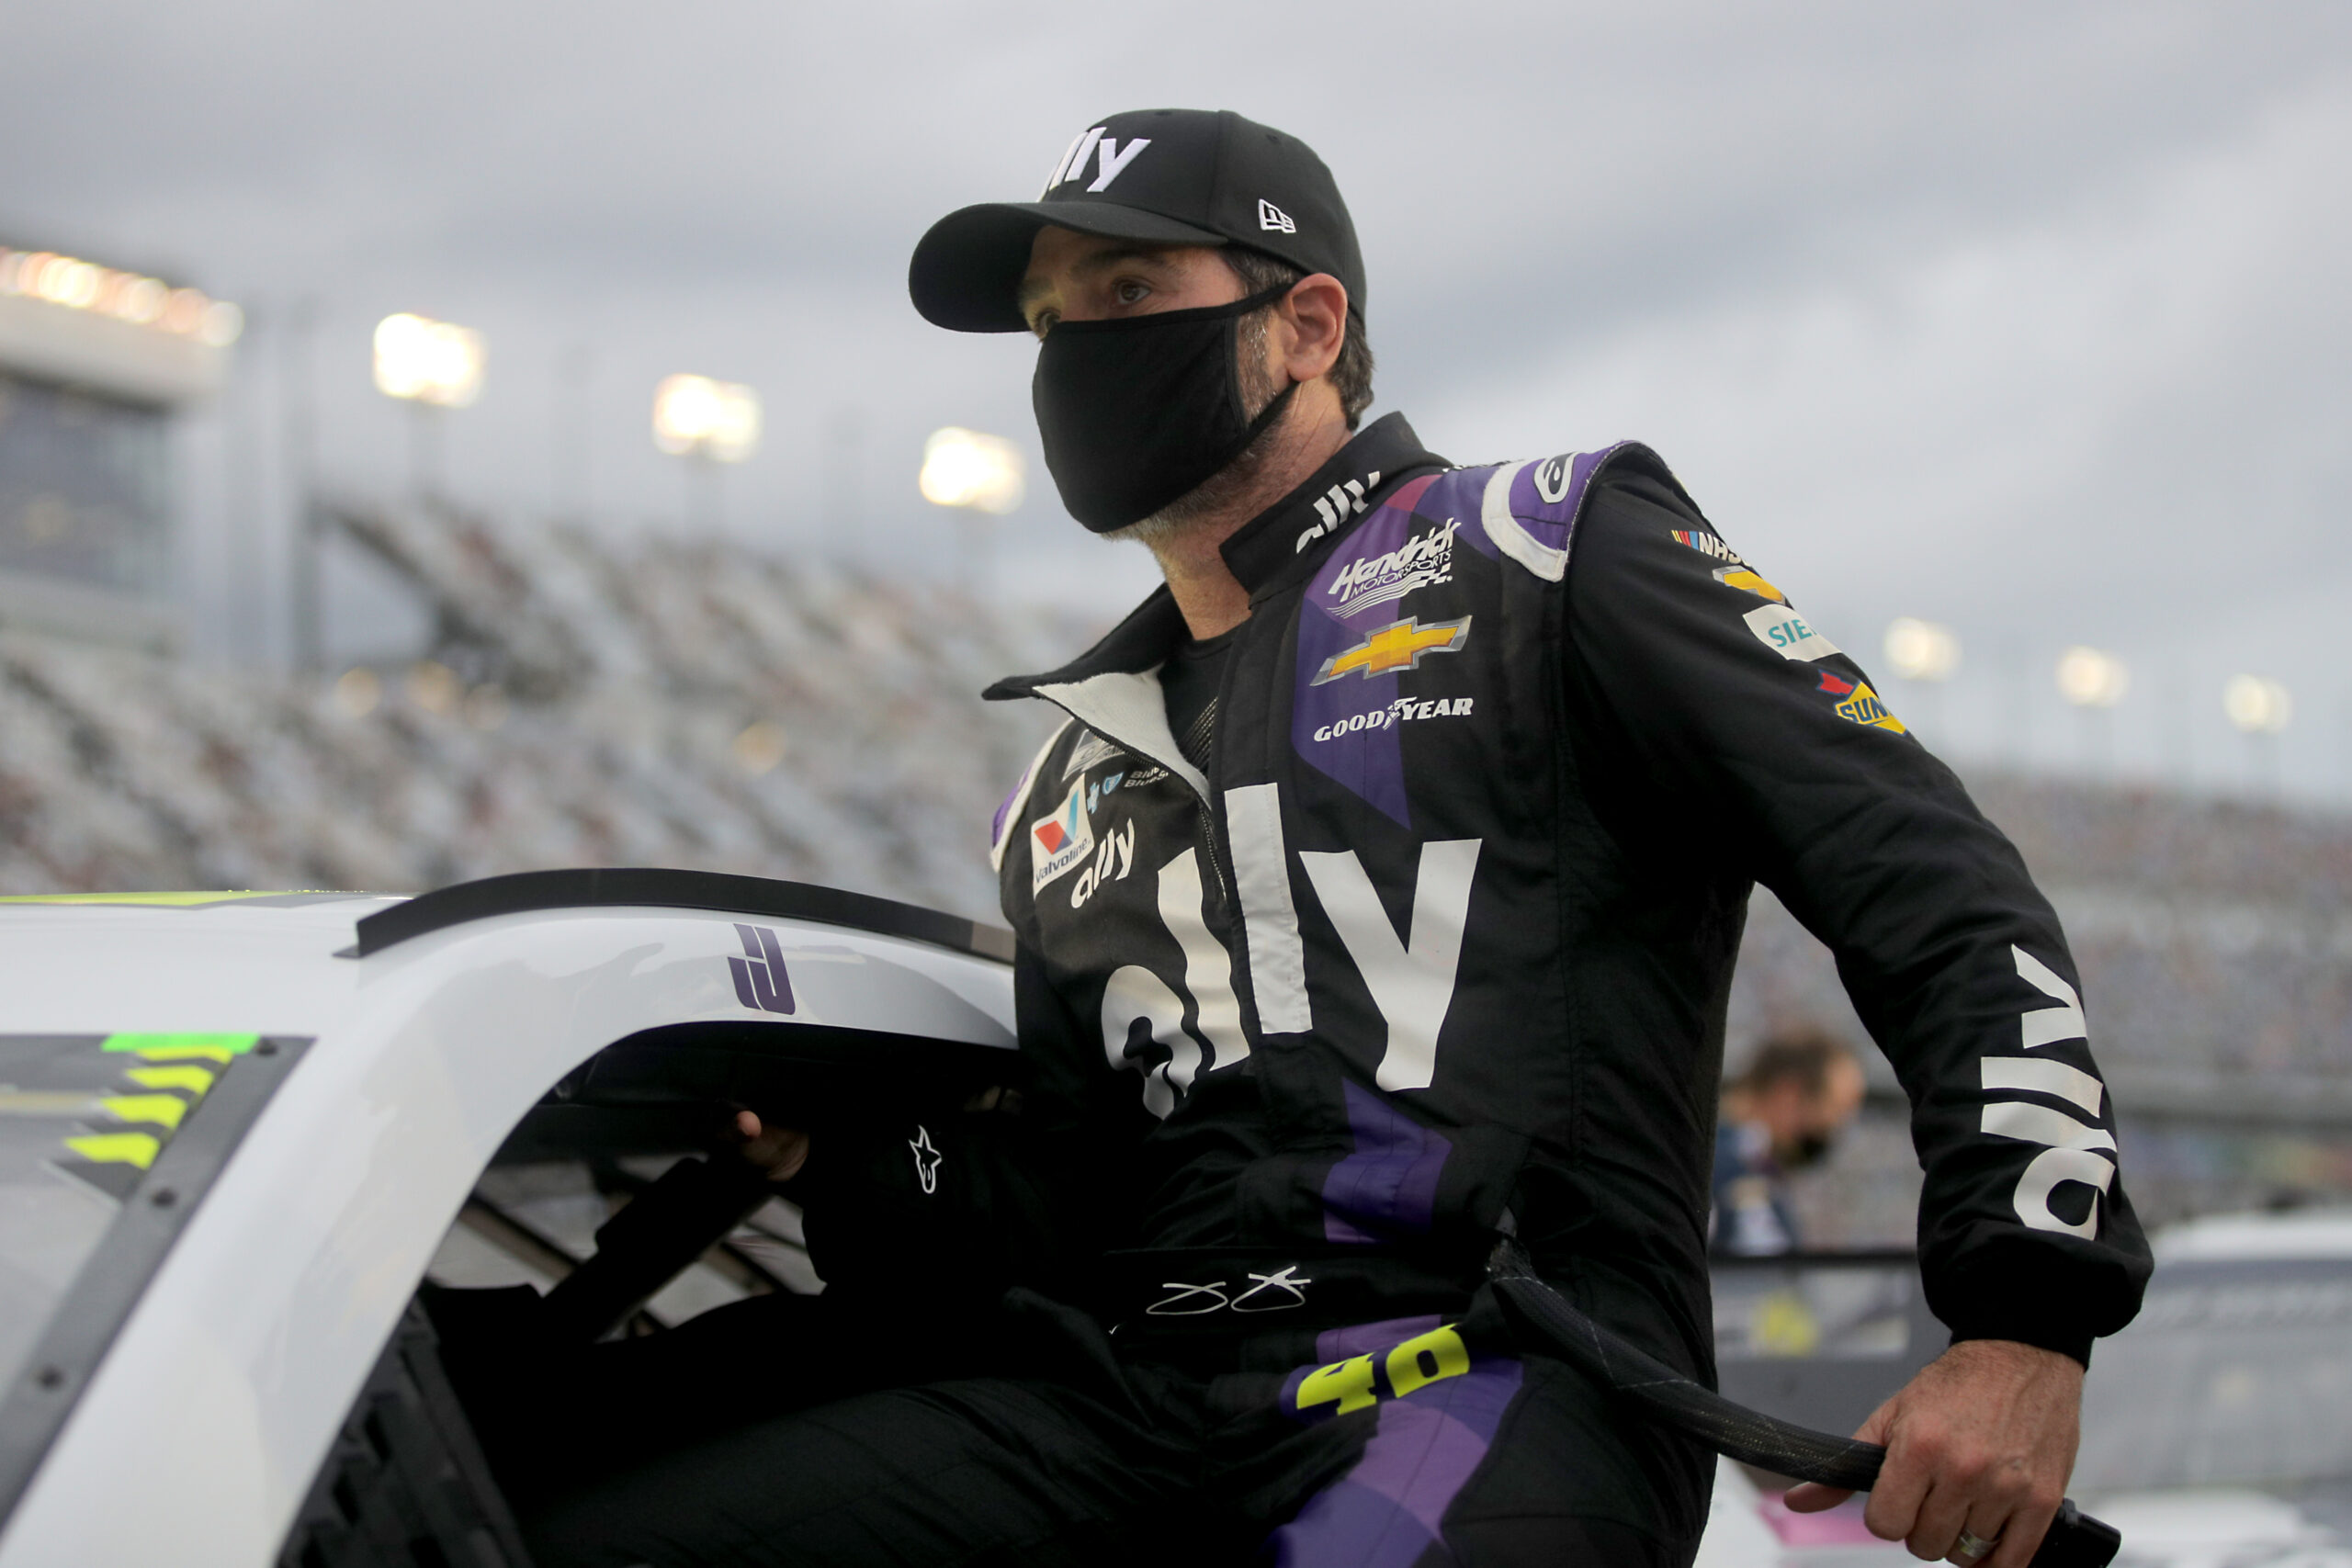 Can Jimmie Johnson return to the winner's circle soon? (Photo Credit: Chris Graythen/Getty Images)